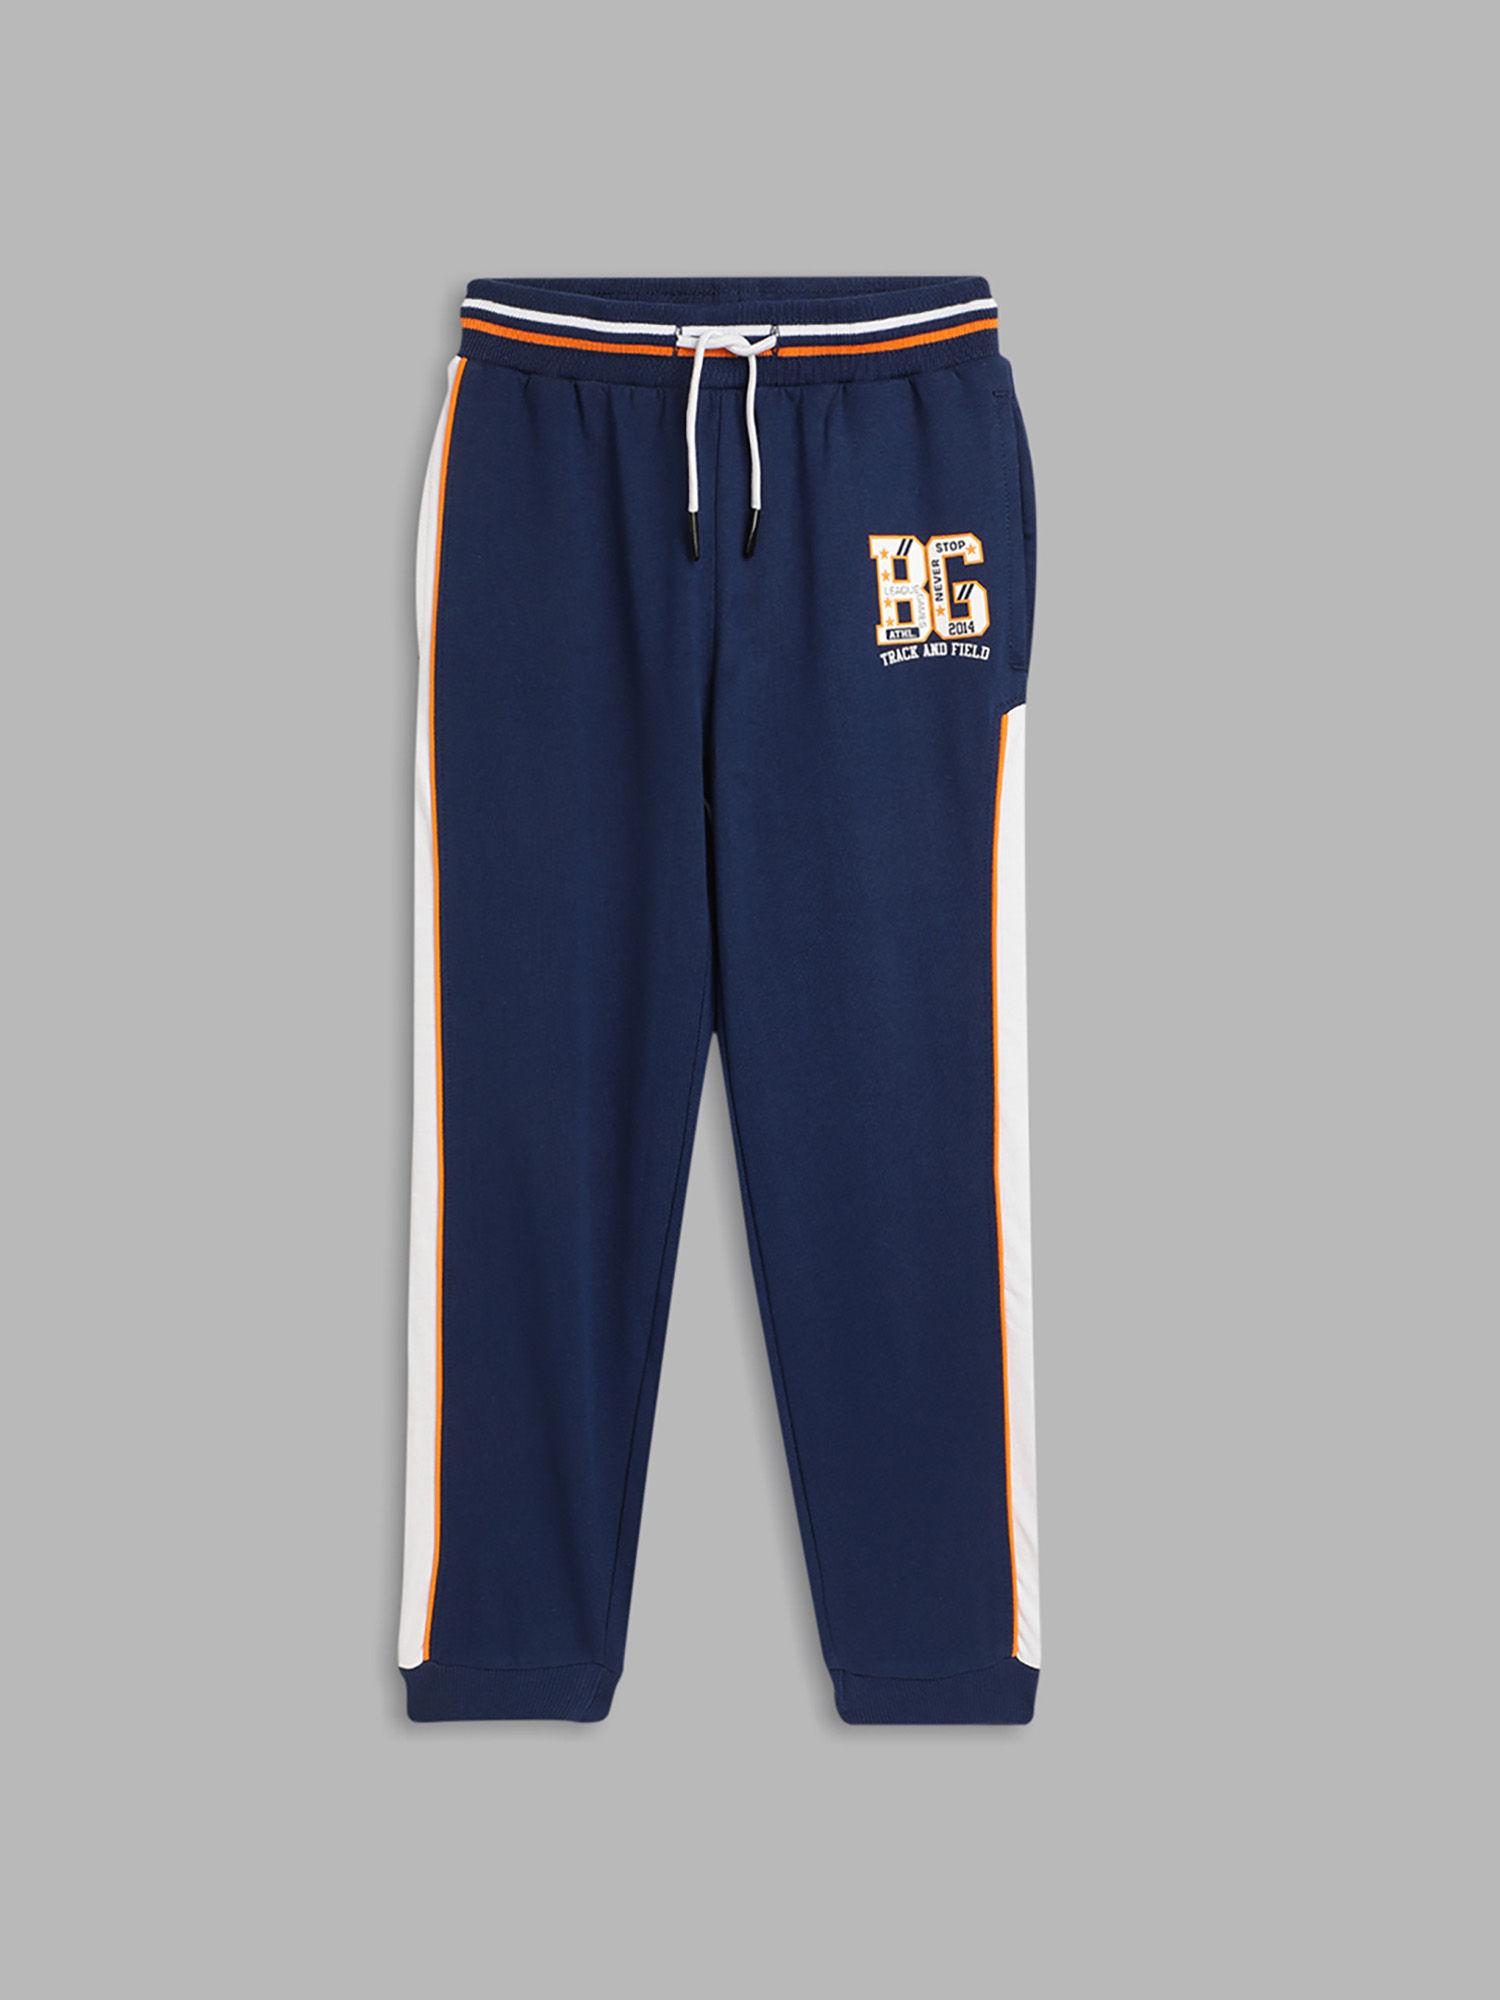 Boys Navy Solid Joggers